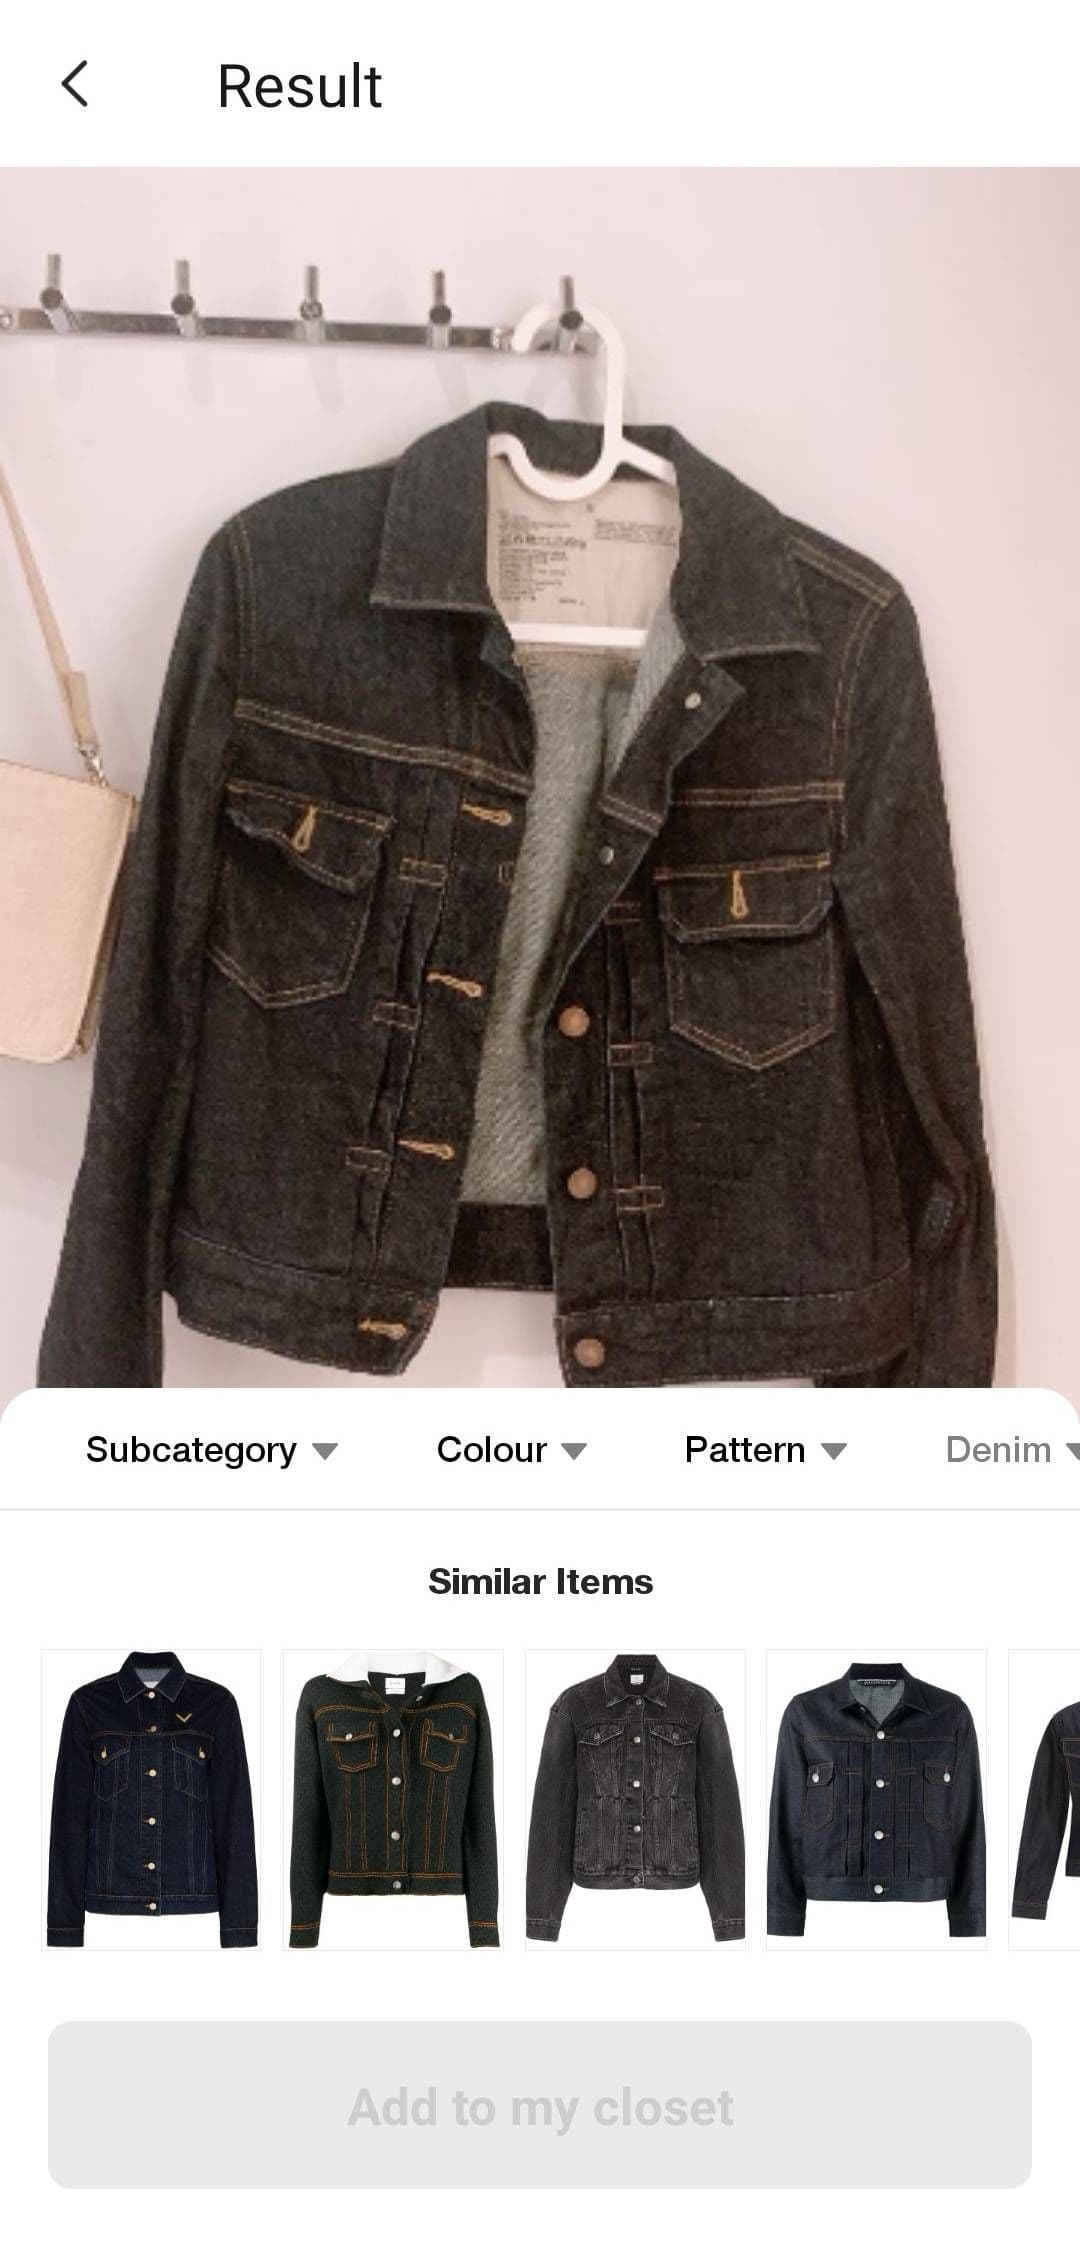 Search results of a denim jacket image.